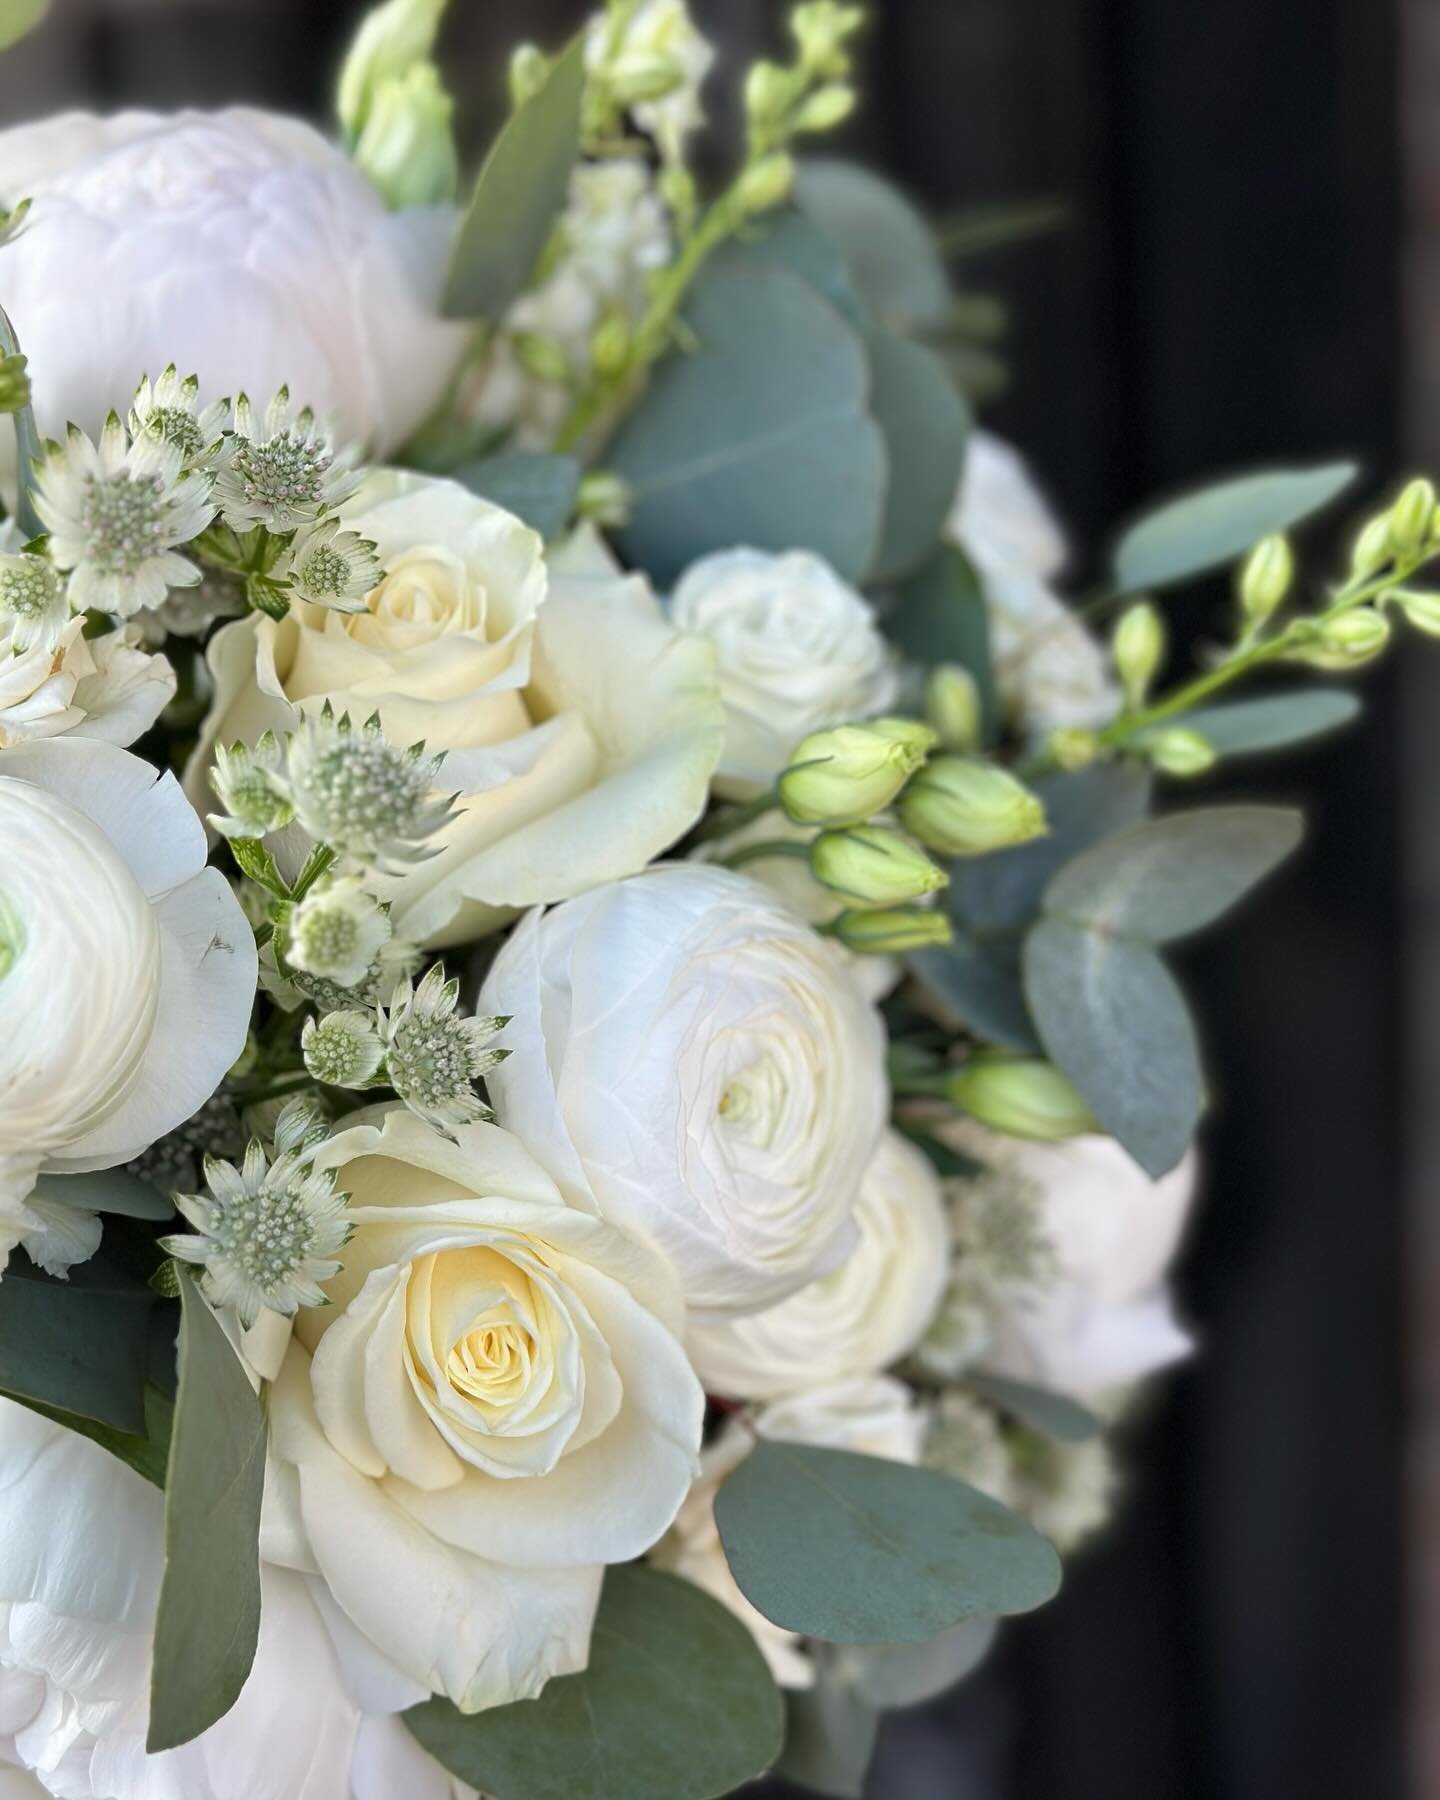 Todays wedding vibes are spectacularly 🫶

Elegant whites &amp; greens with scrumptious textures from so many beautiful florals 😍